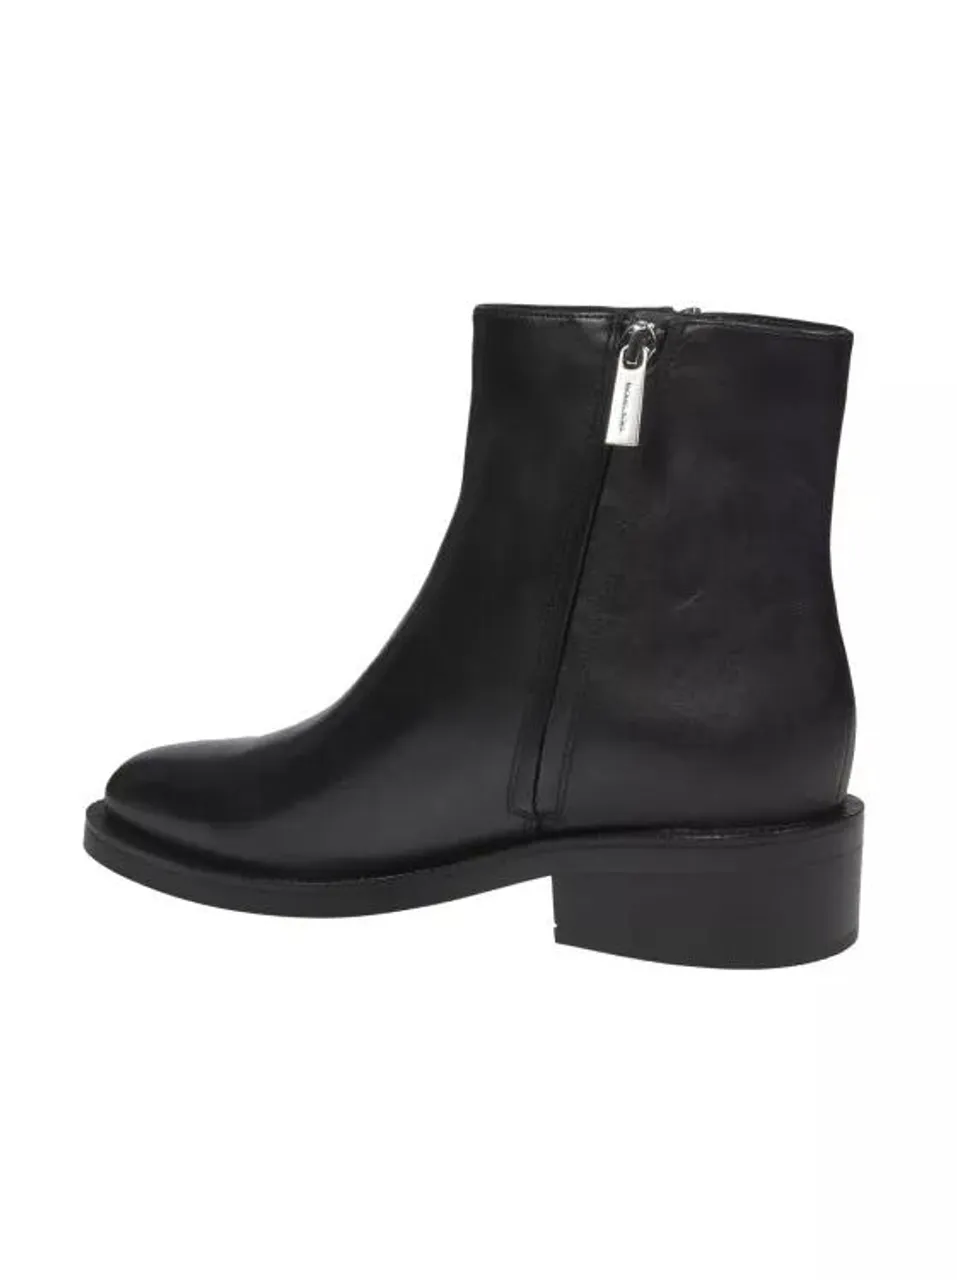 Michael Kors Boots & Ankle Boots - Regan Flat Bootie - black - Boots & Ankle Boots for ladies